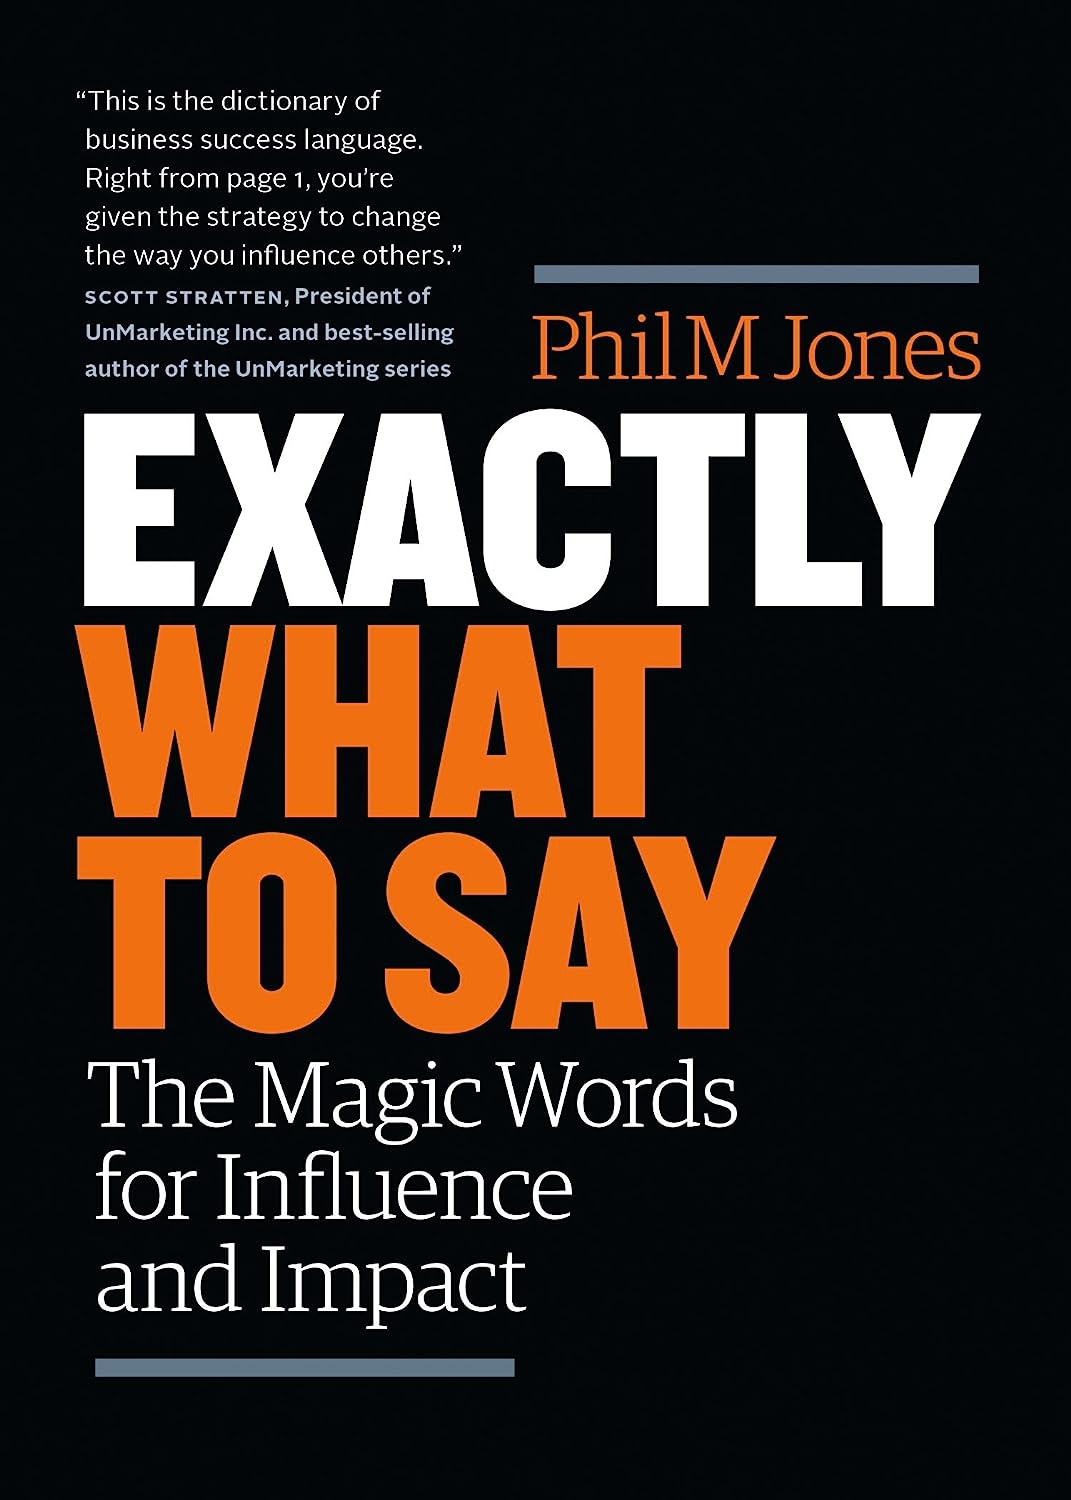 Exactly What To Say : The Magic Words for Influence and Impact - MPHOnline.com